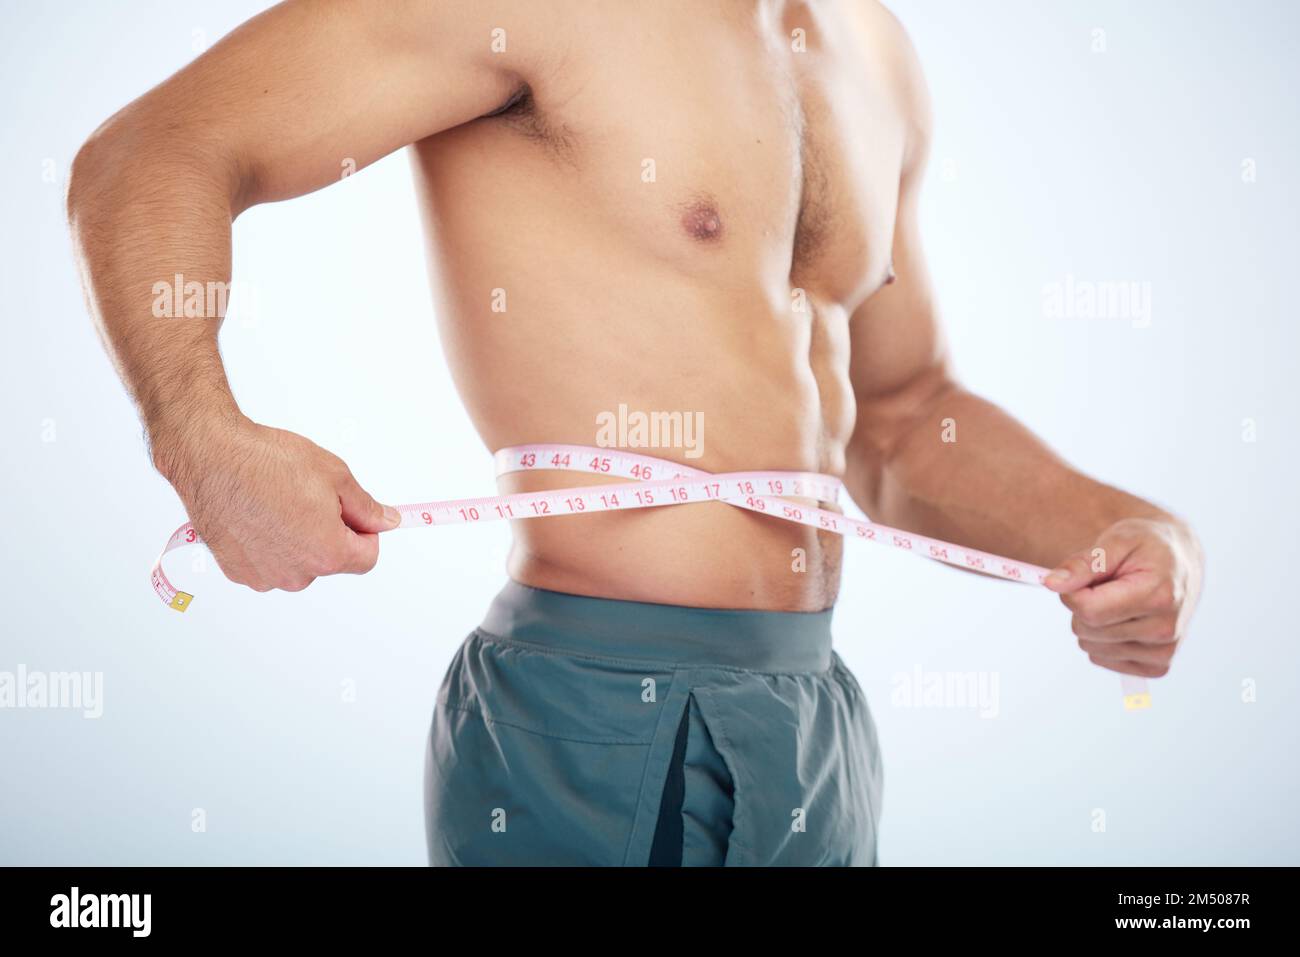 Image of muscular man measure his waist with measuring tape in centimeters  Stock Photo - Alamy